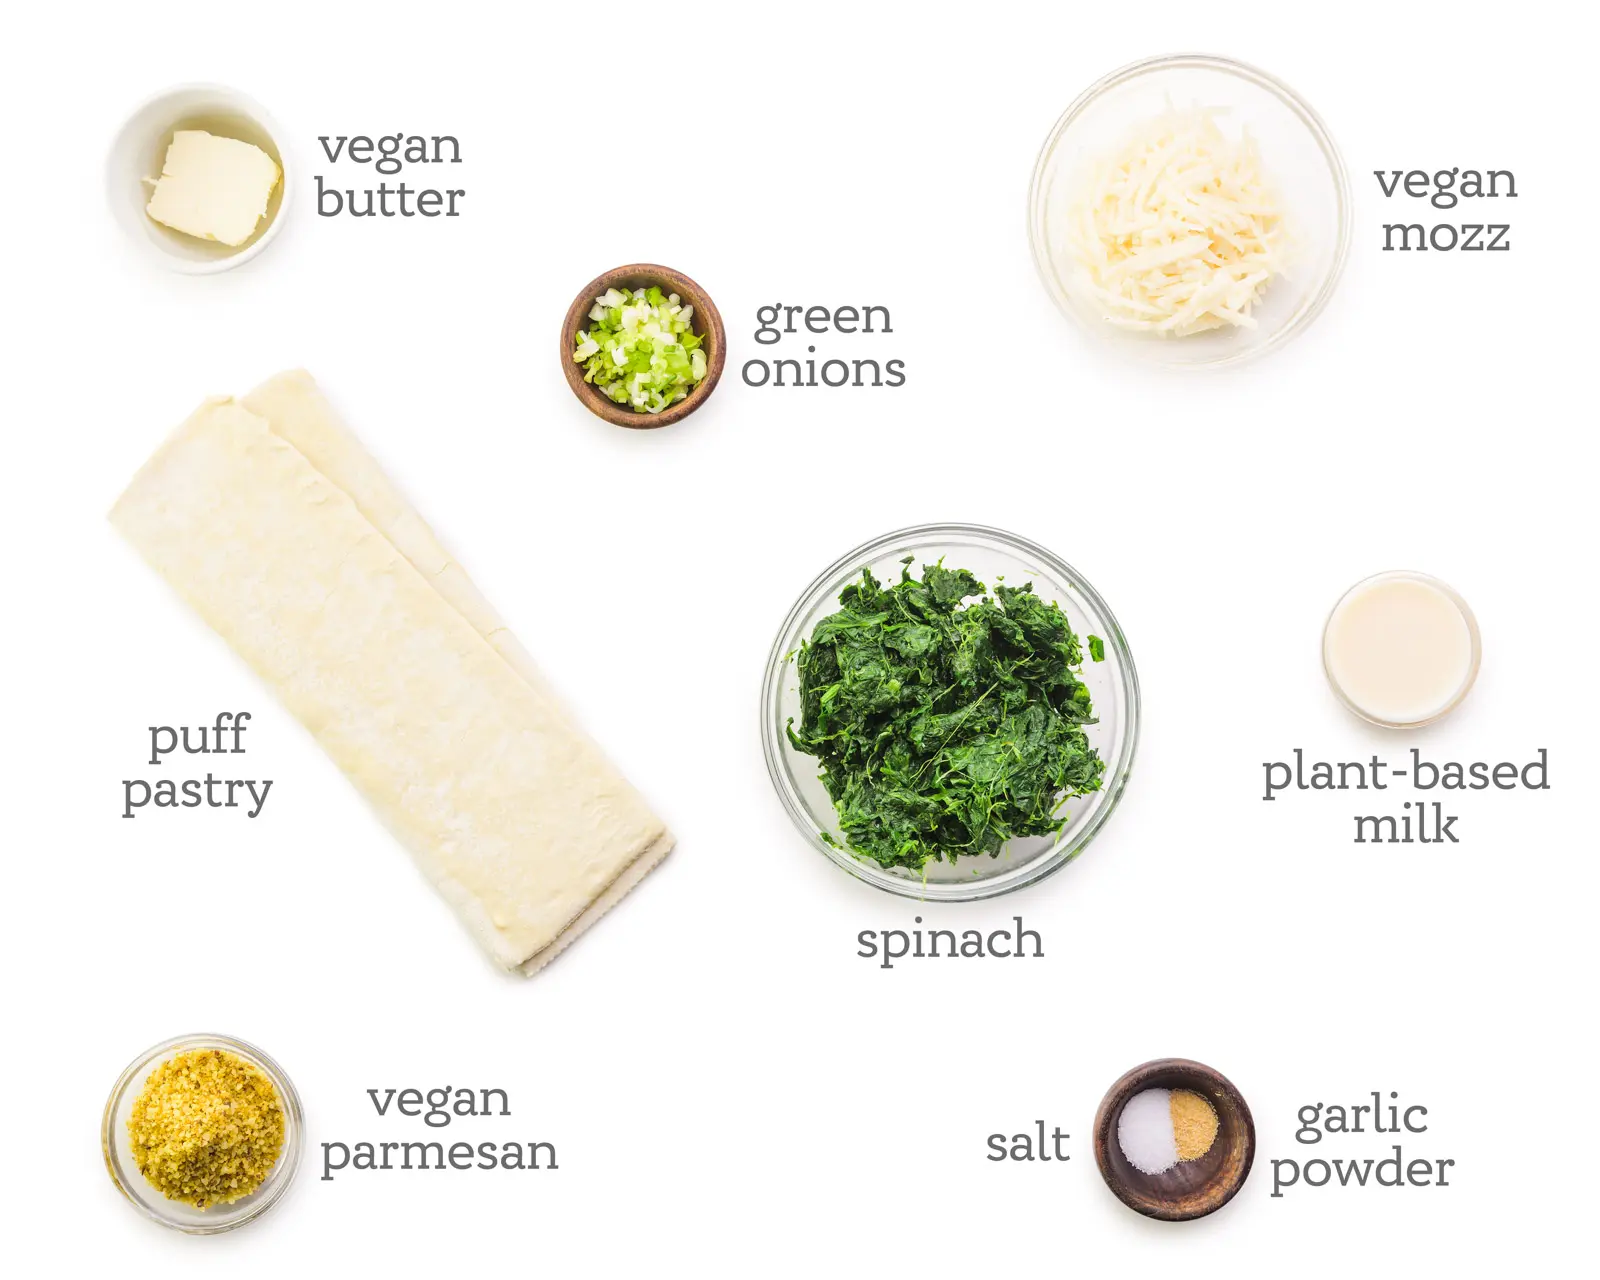 Ingredients are laid out on a white counter. The labels next to the ingredients read, vegan mozz, plant-based milk, garlic powder, salt, spinach, vegan parmesan, puff pastry, vegan butter, and green onions.